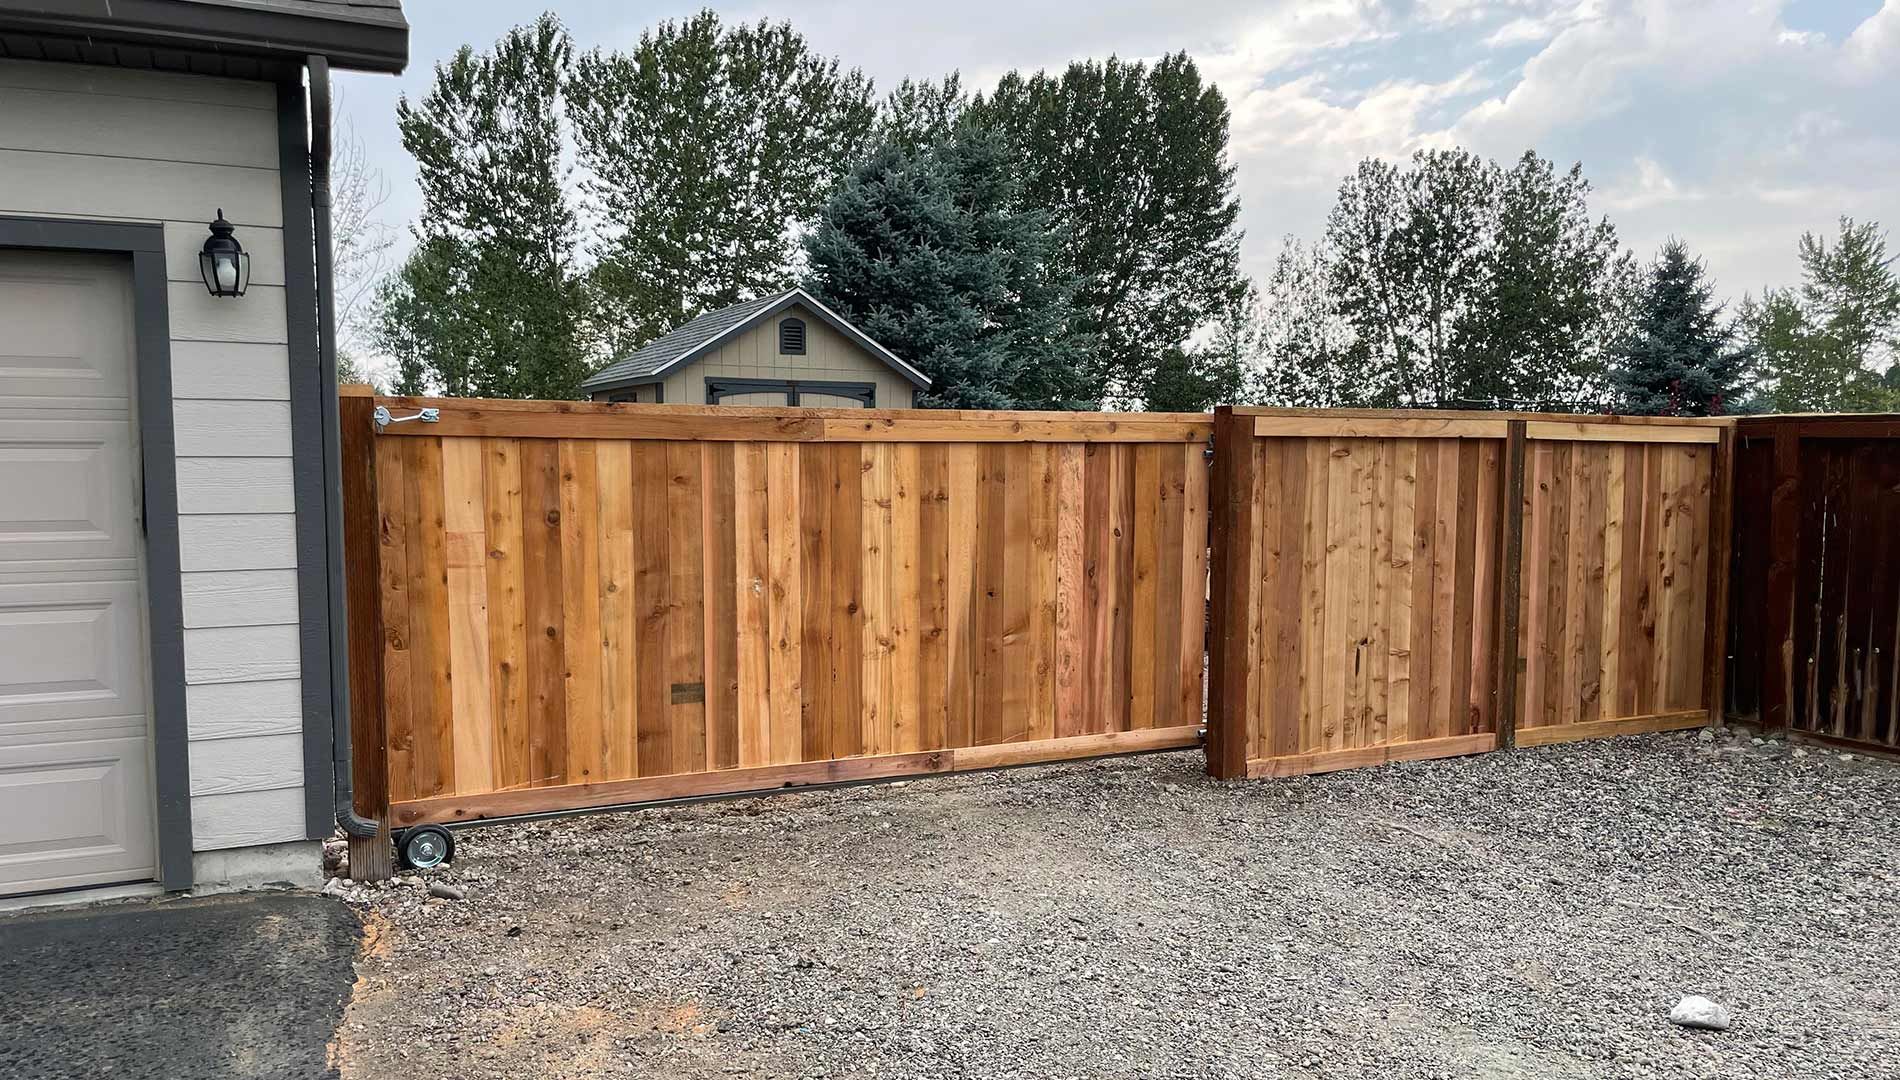 A wooden fence is sitting in front of a garage next to a house.